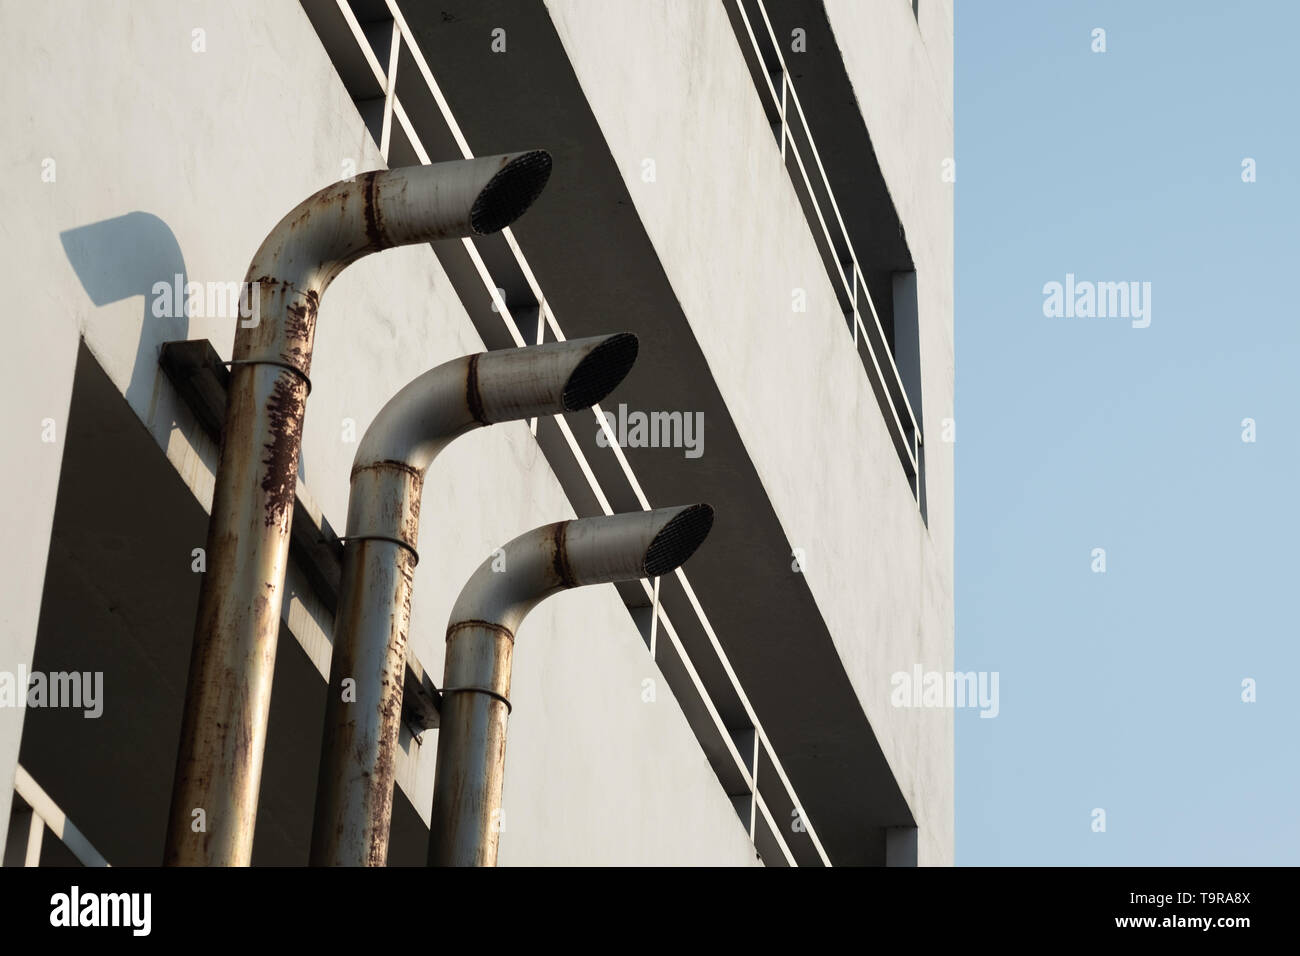 Three pipe ventilation ducts For venting smoke outside the building, rusty surface surrounding with sunlight and blue sky background. Stock Photo